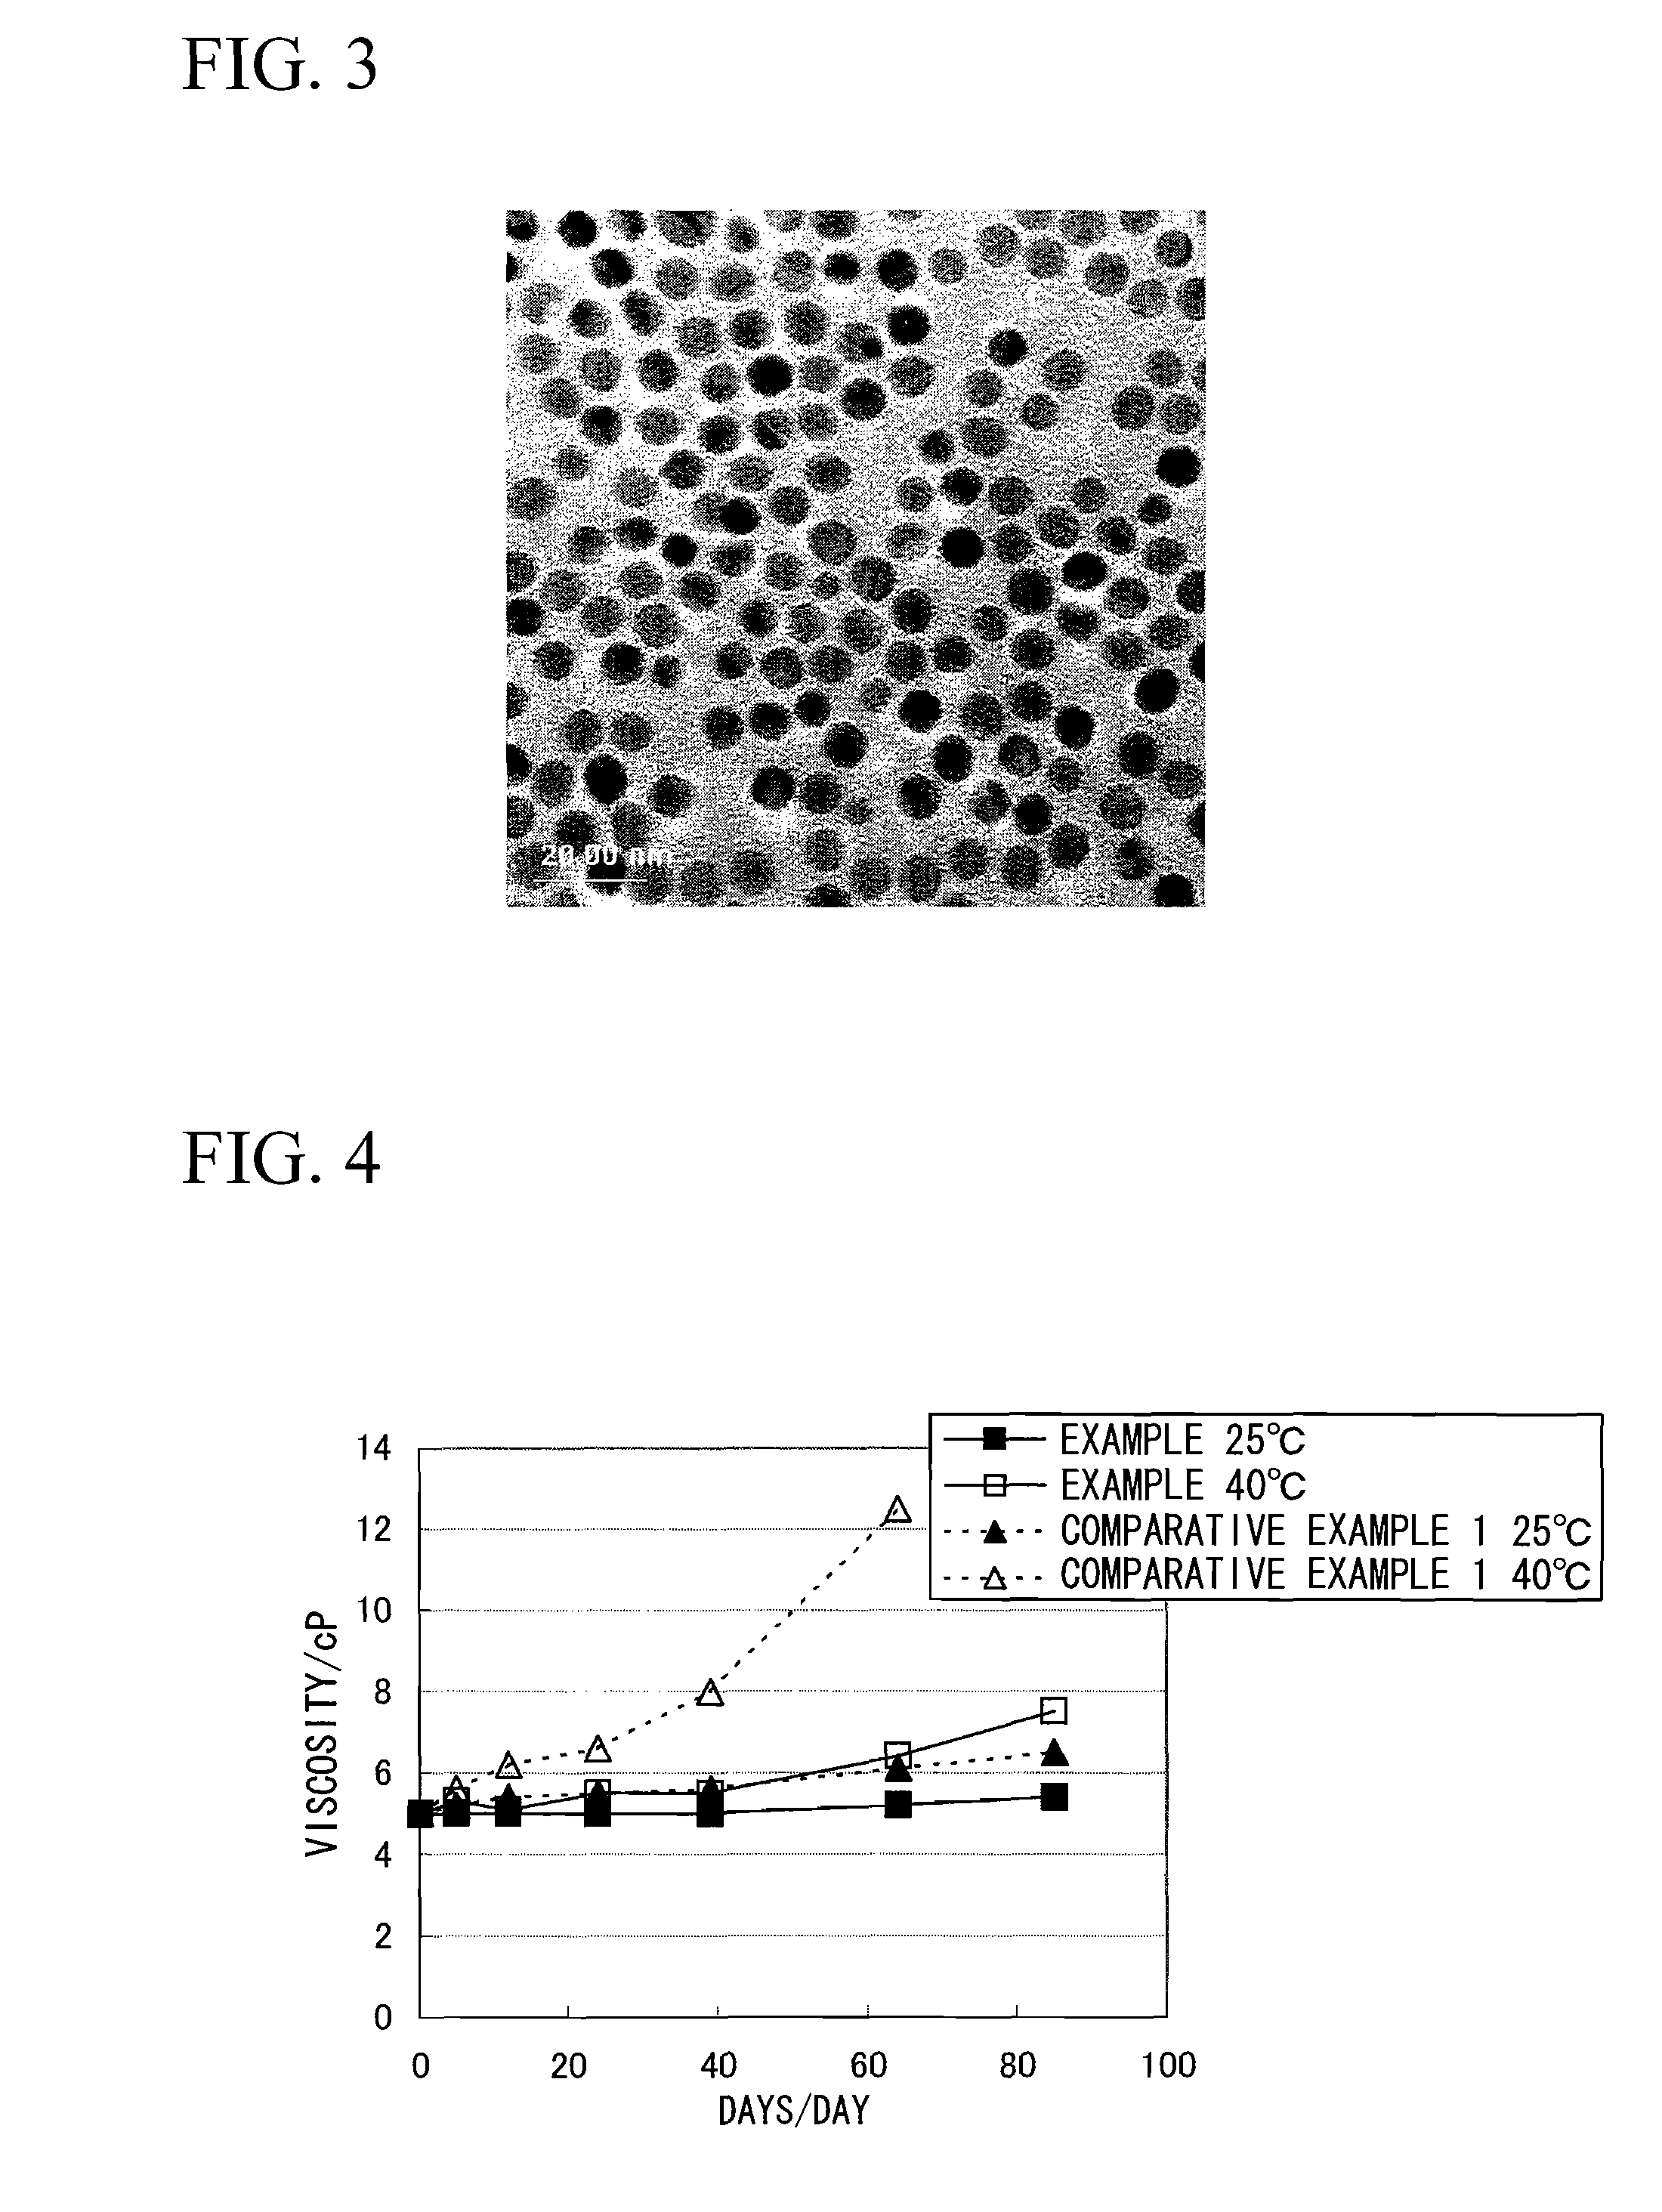 Metal Colloidal Particles, Metal Colloid and Use of Metal Colloid